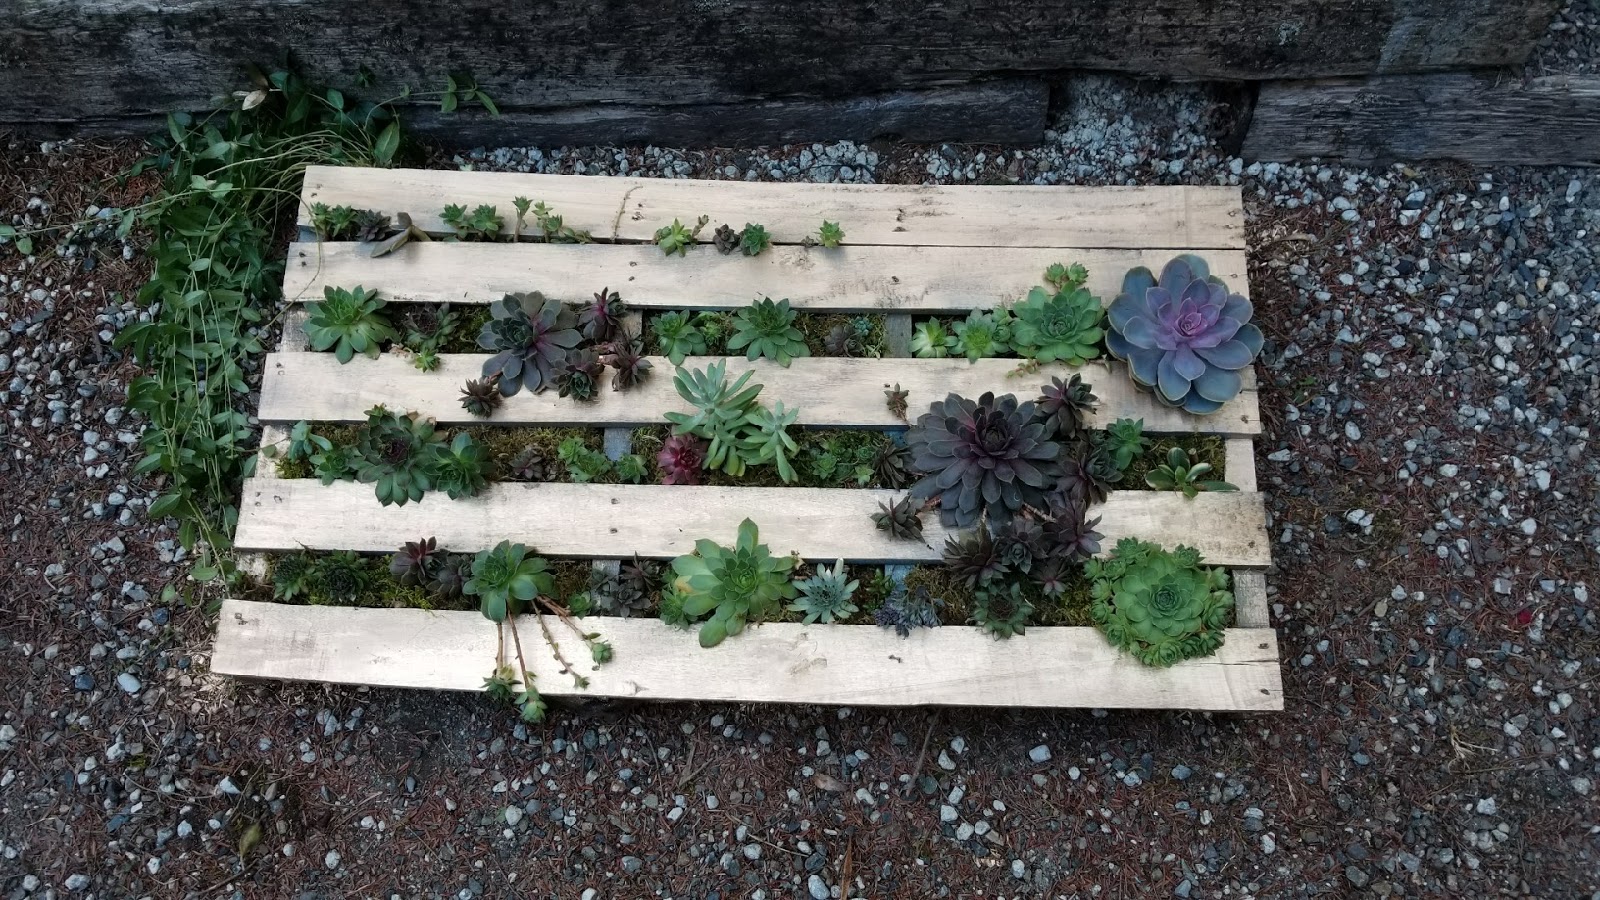 Plants growing through a wooden pallet